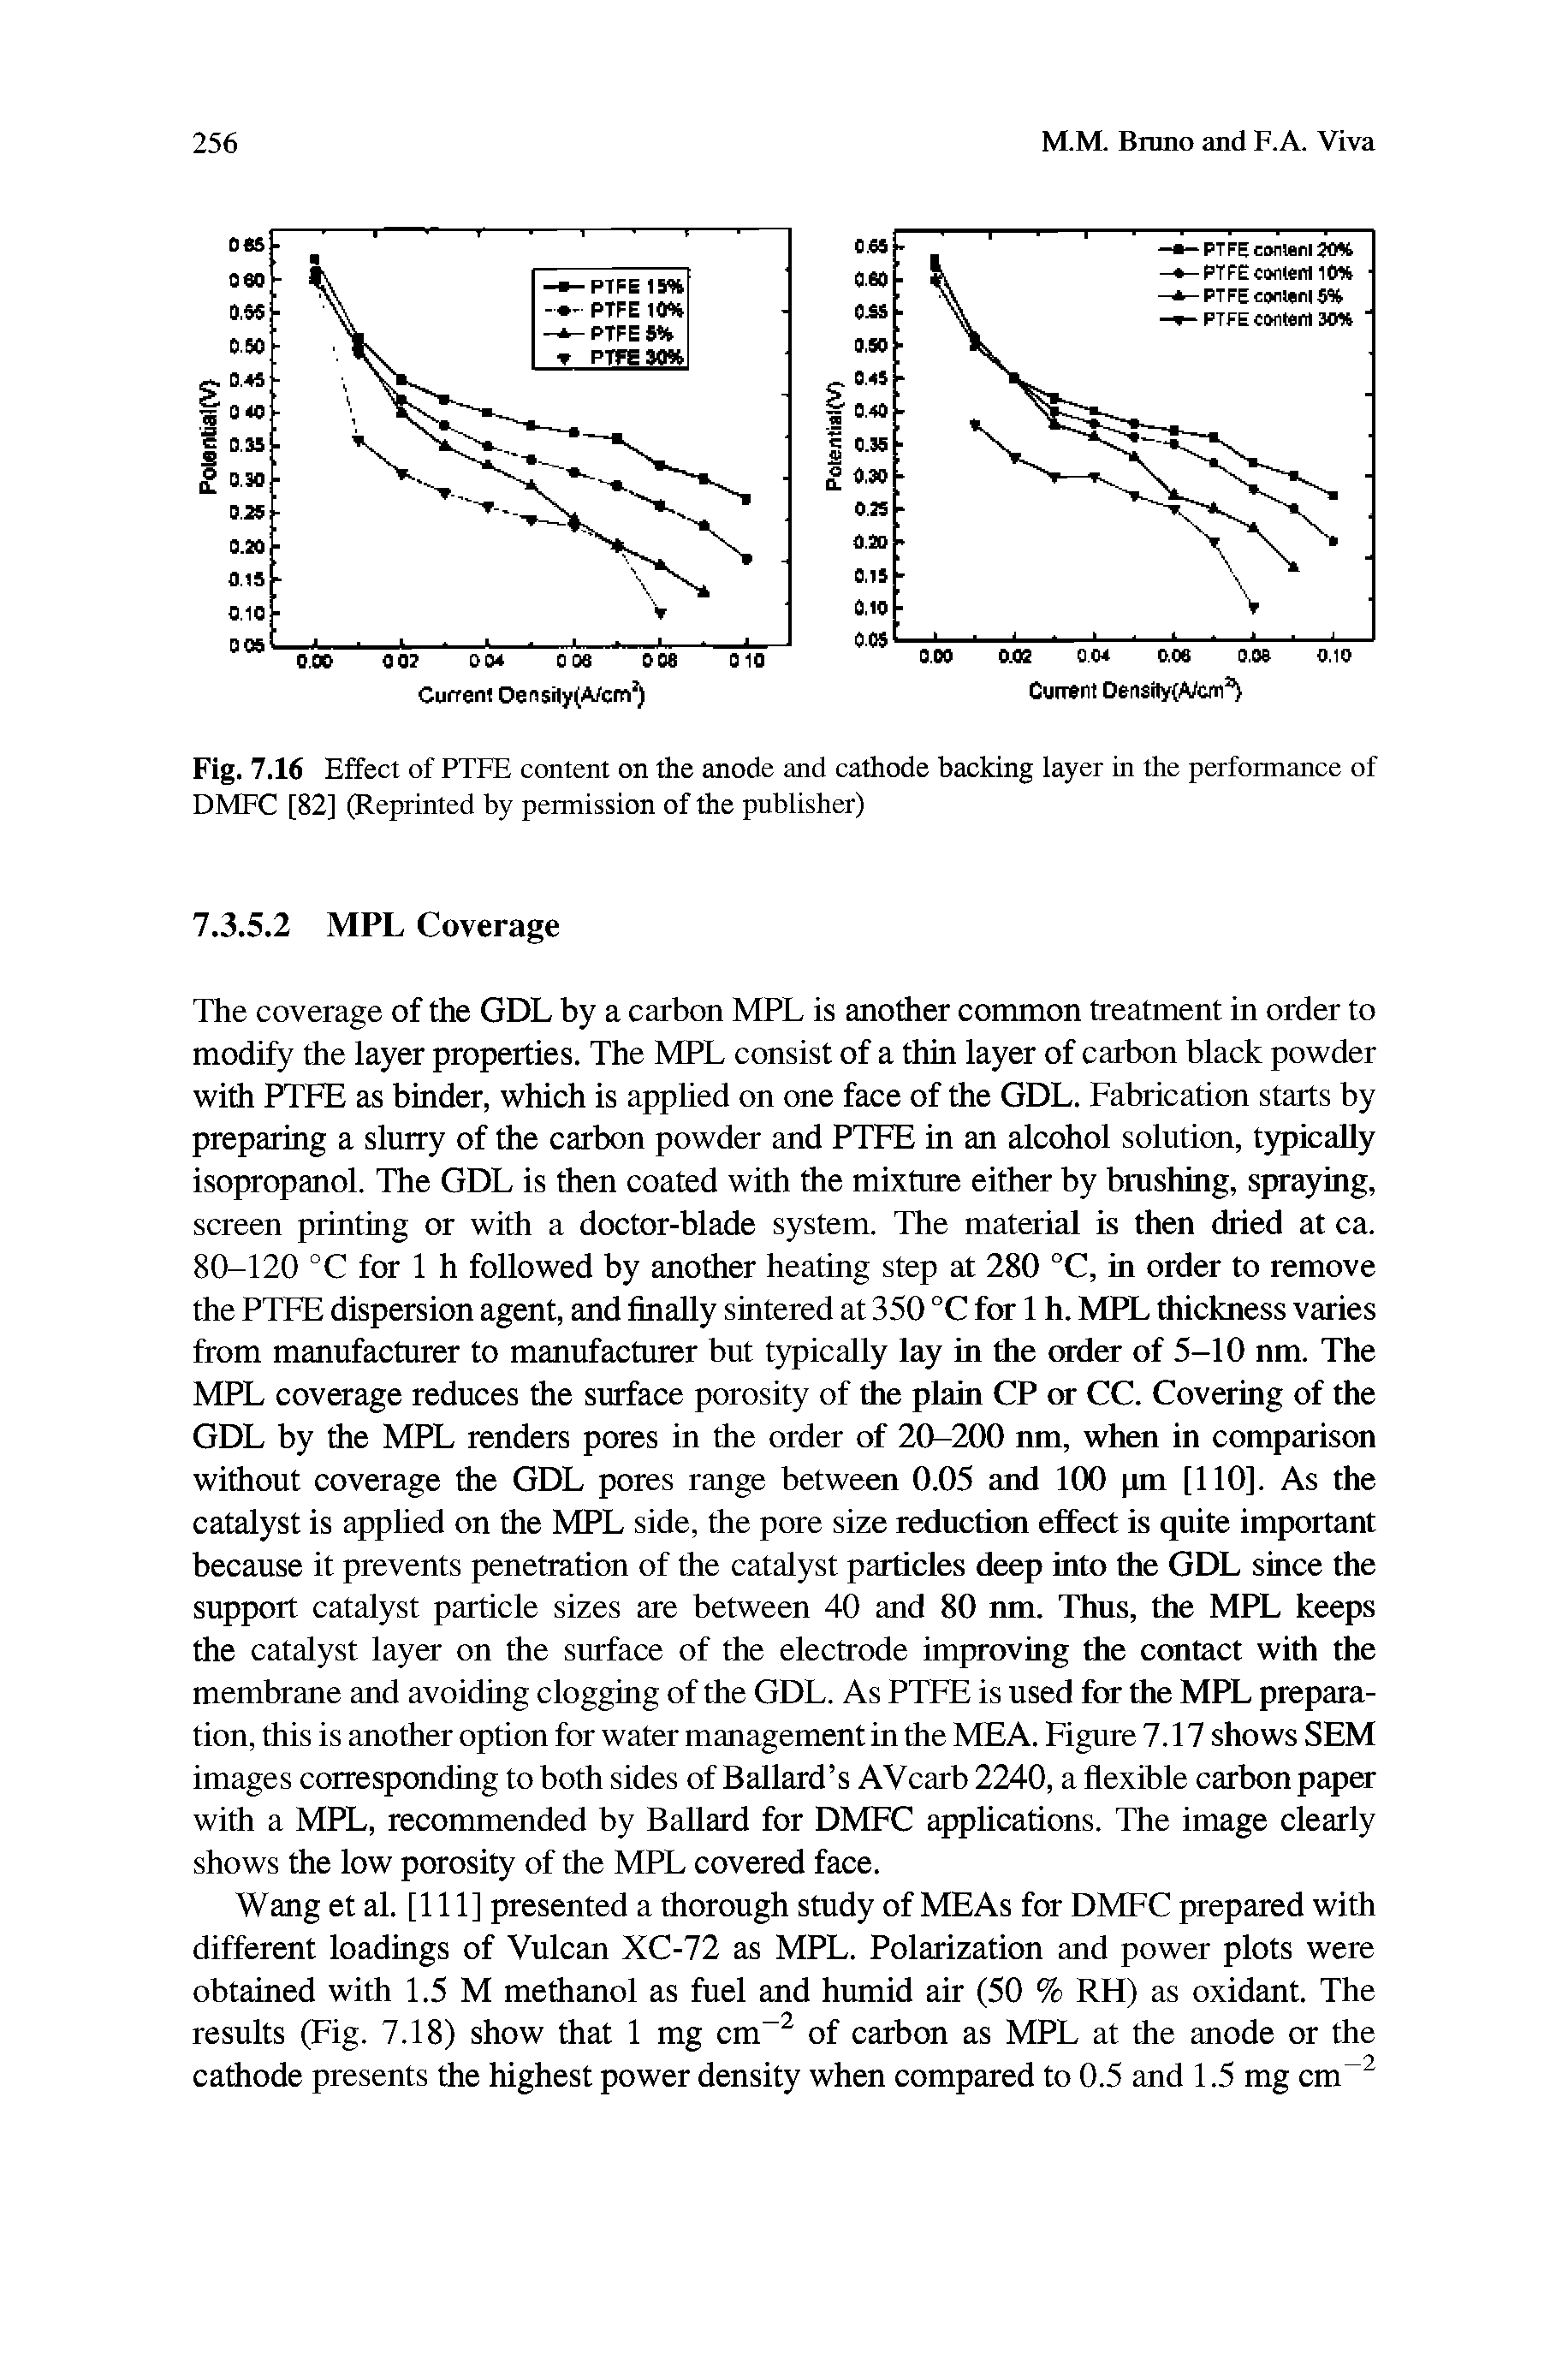 Fig. 7.16 Effect of PTEE content on the anode and cathode backing layer in the performance of DMFC [82] (Reprinted by permission of the publisher)...